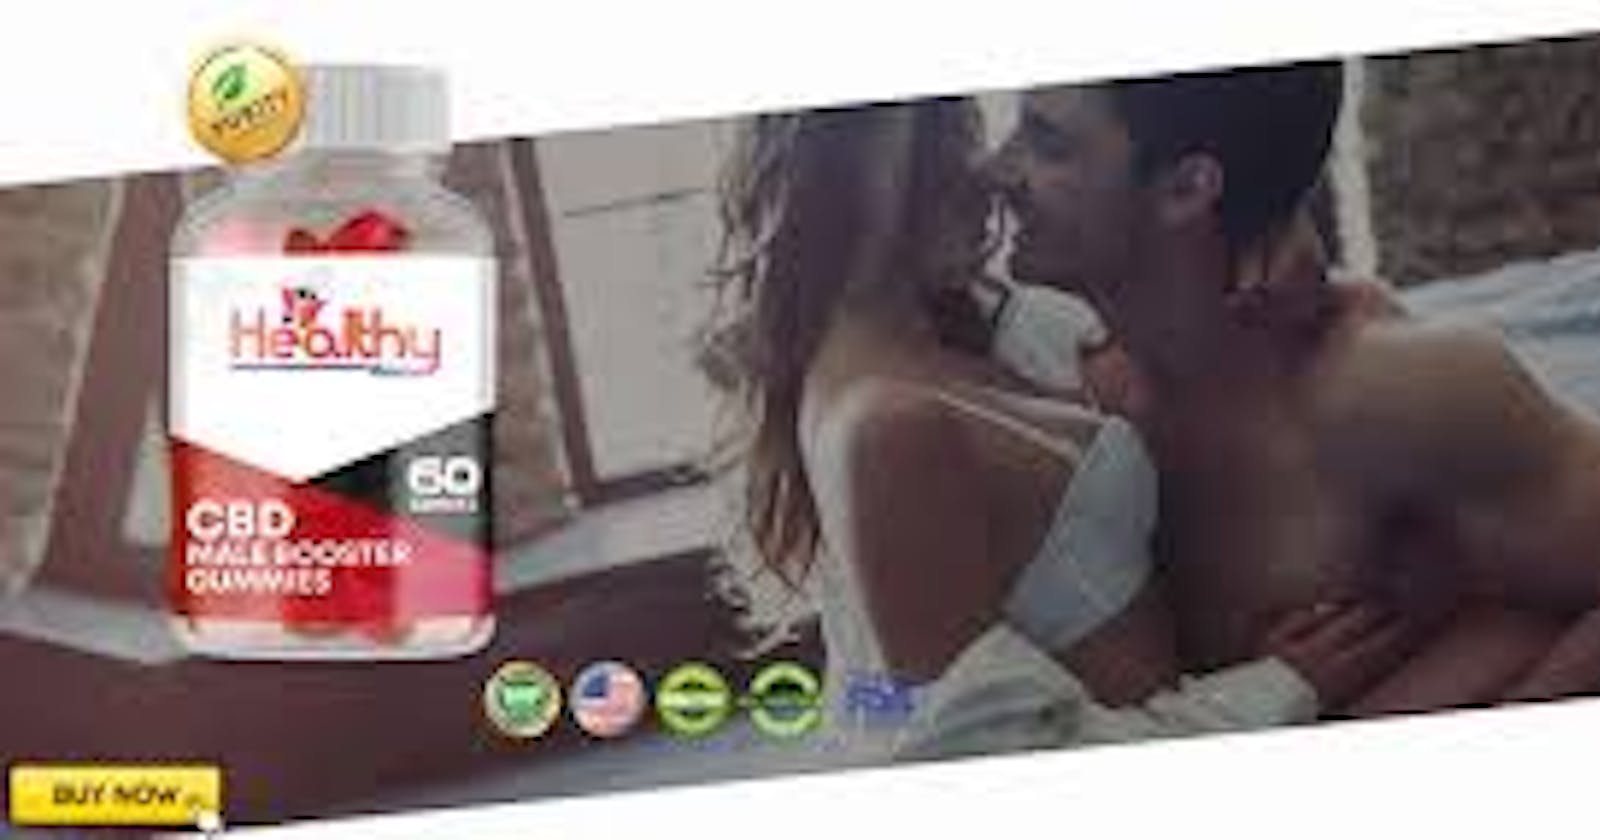 Healthy Visions CBD Male Booster Gummies Review: Scam or Legit? Serious Side Effects Risk?